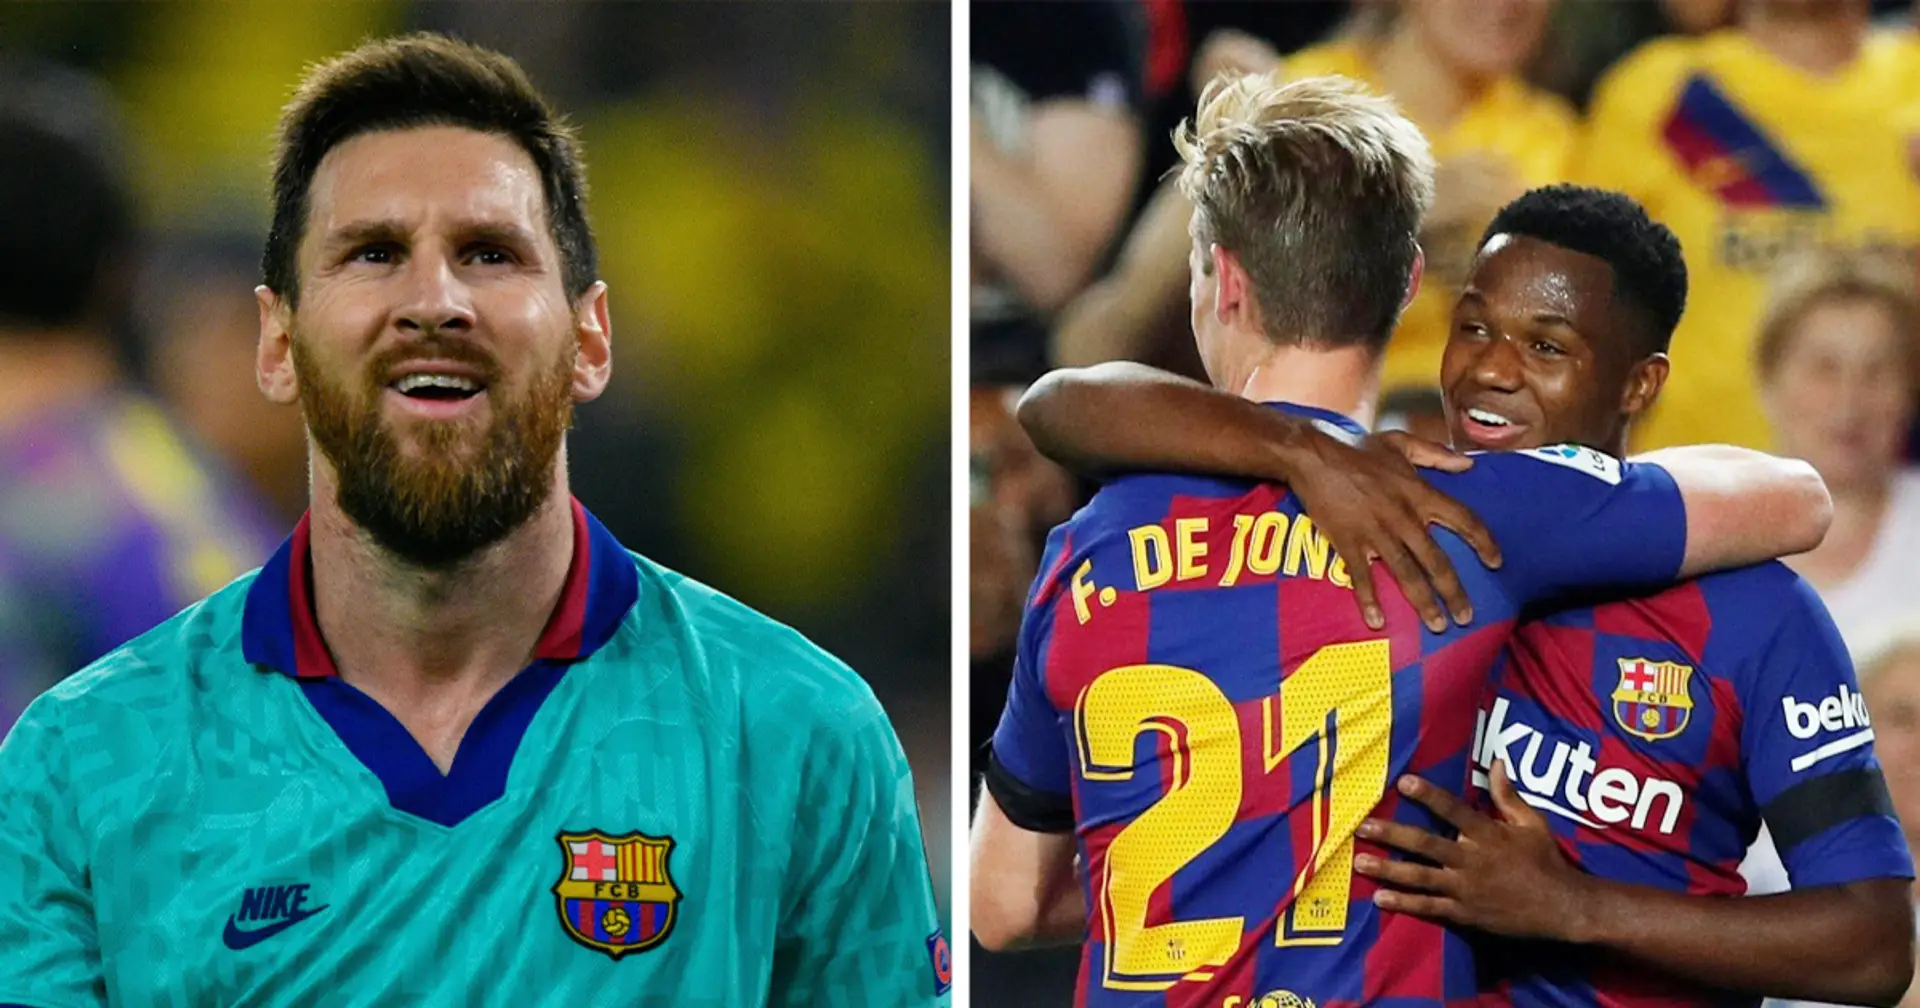 Barca's first season without Messi: How club prepare for it and what to expect